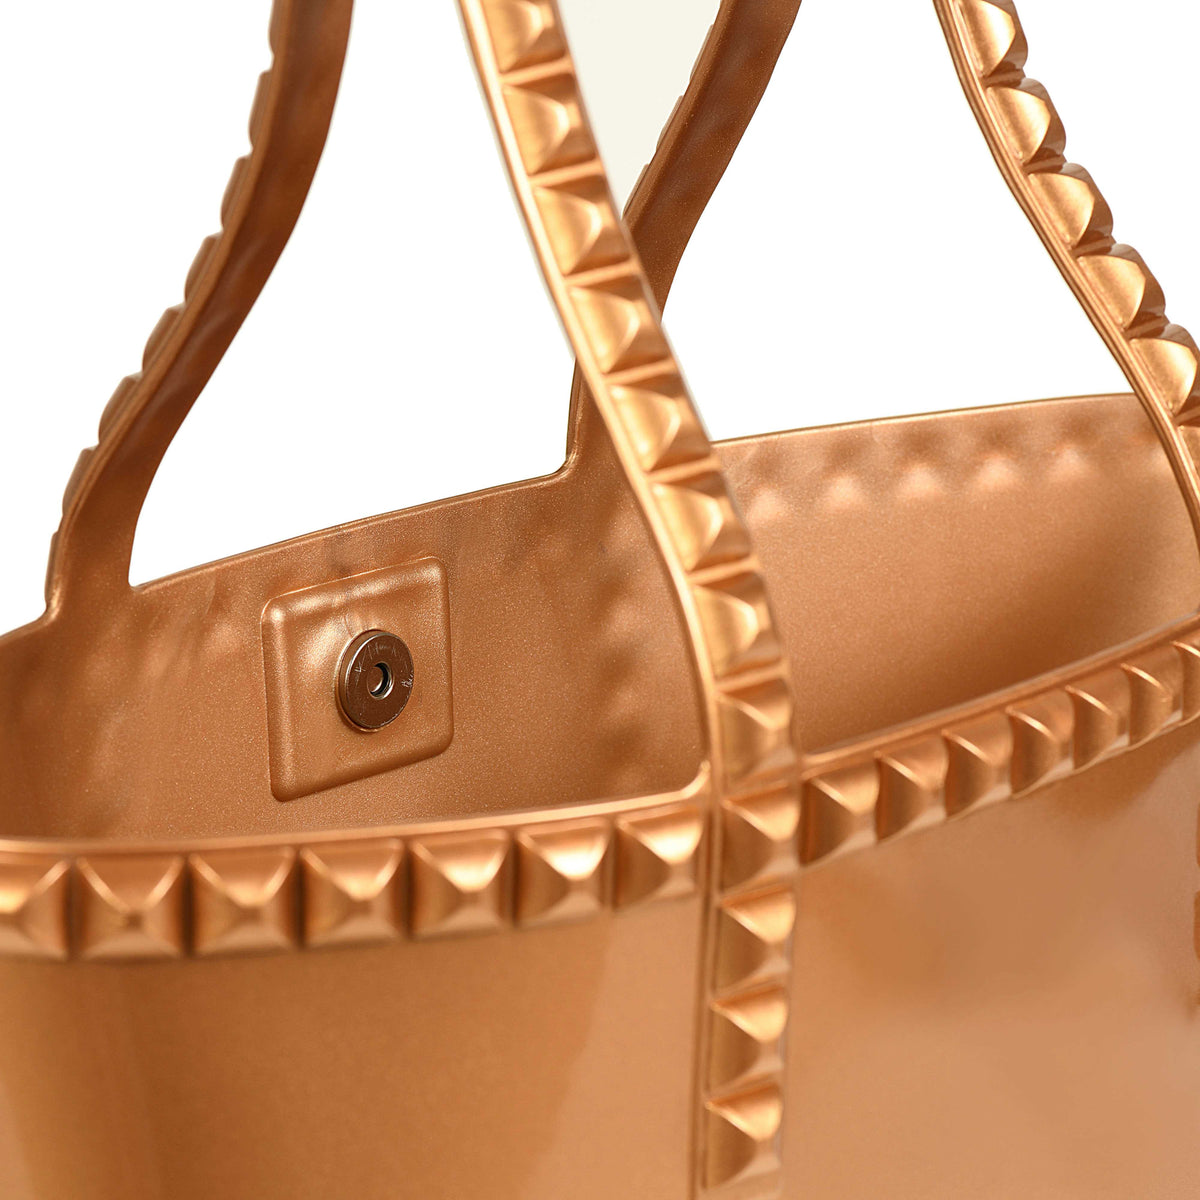 Inner view of Carmen Sol jumbo studded purse in color rose gold